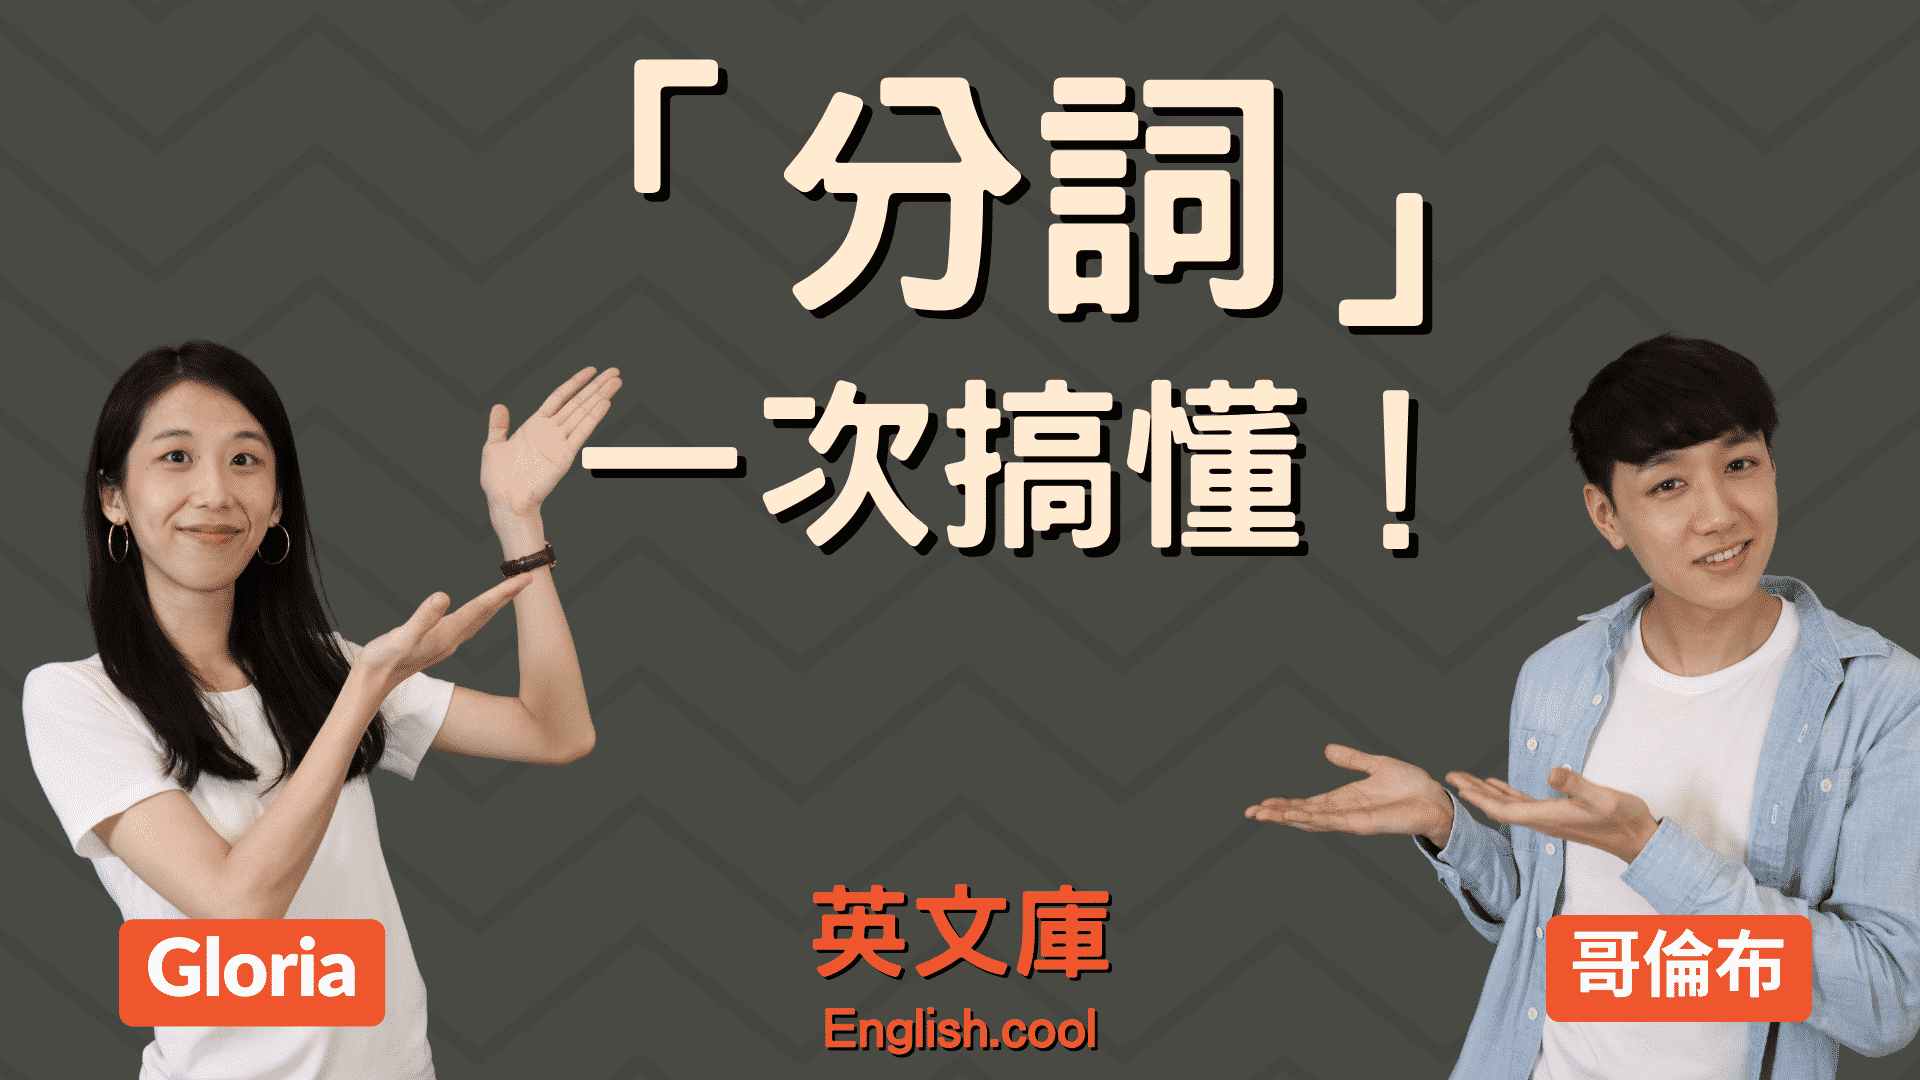 You are currently viewing 「分詞」是什麼？「過去分詞」與「現在分詞」的用法！